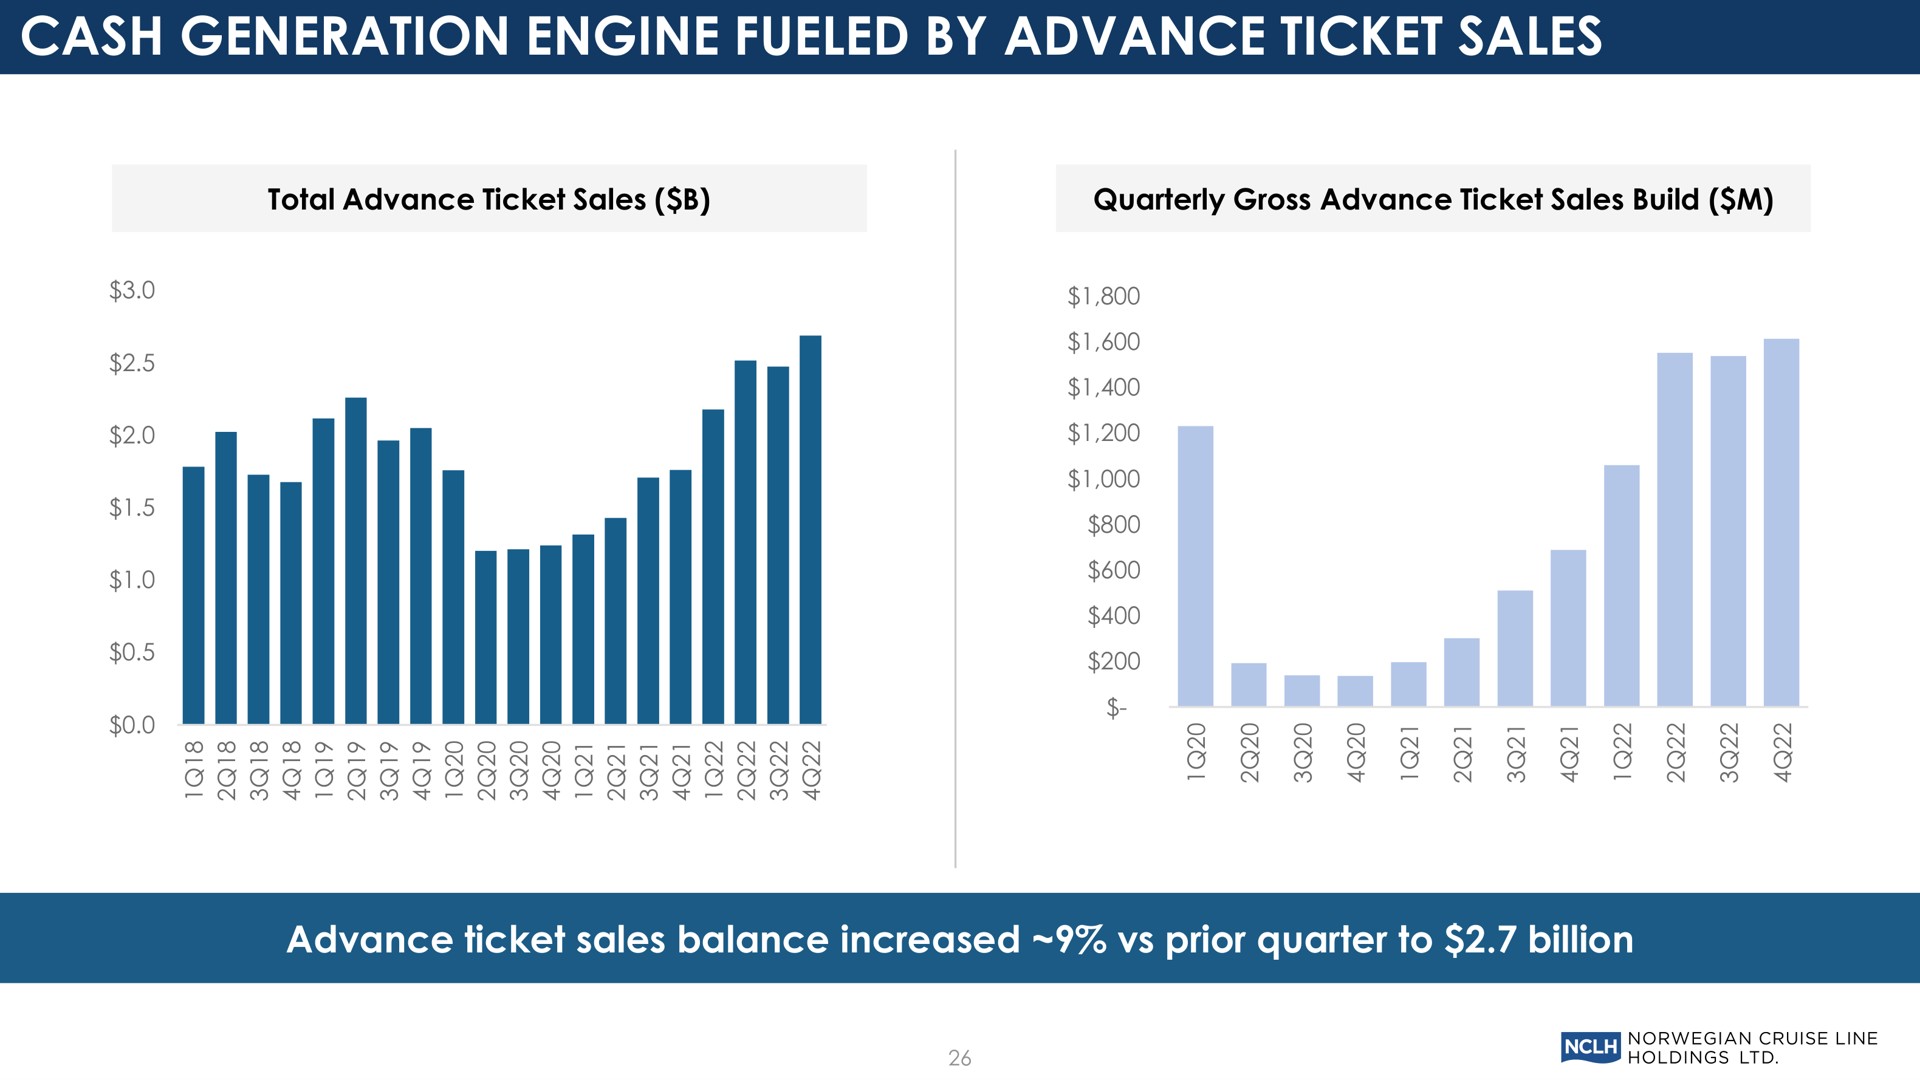 cash generation engine fueled by advance ticket sales | Norwegian Cruise Line